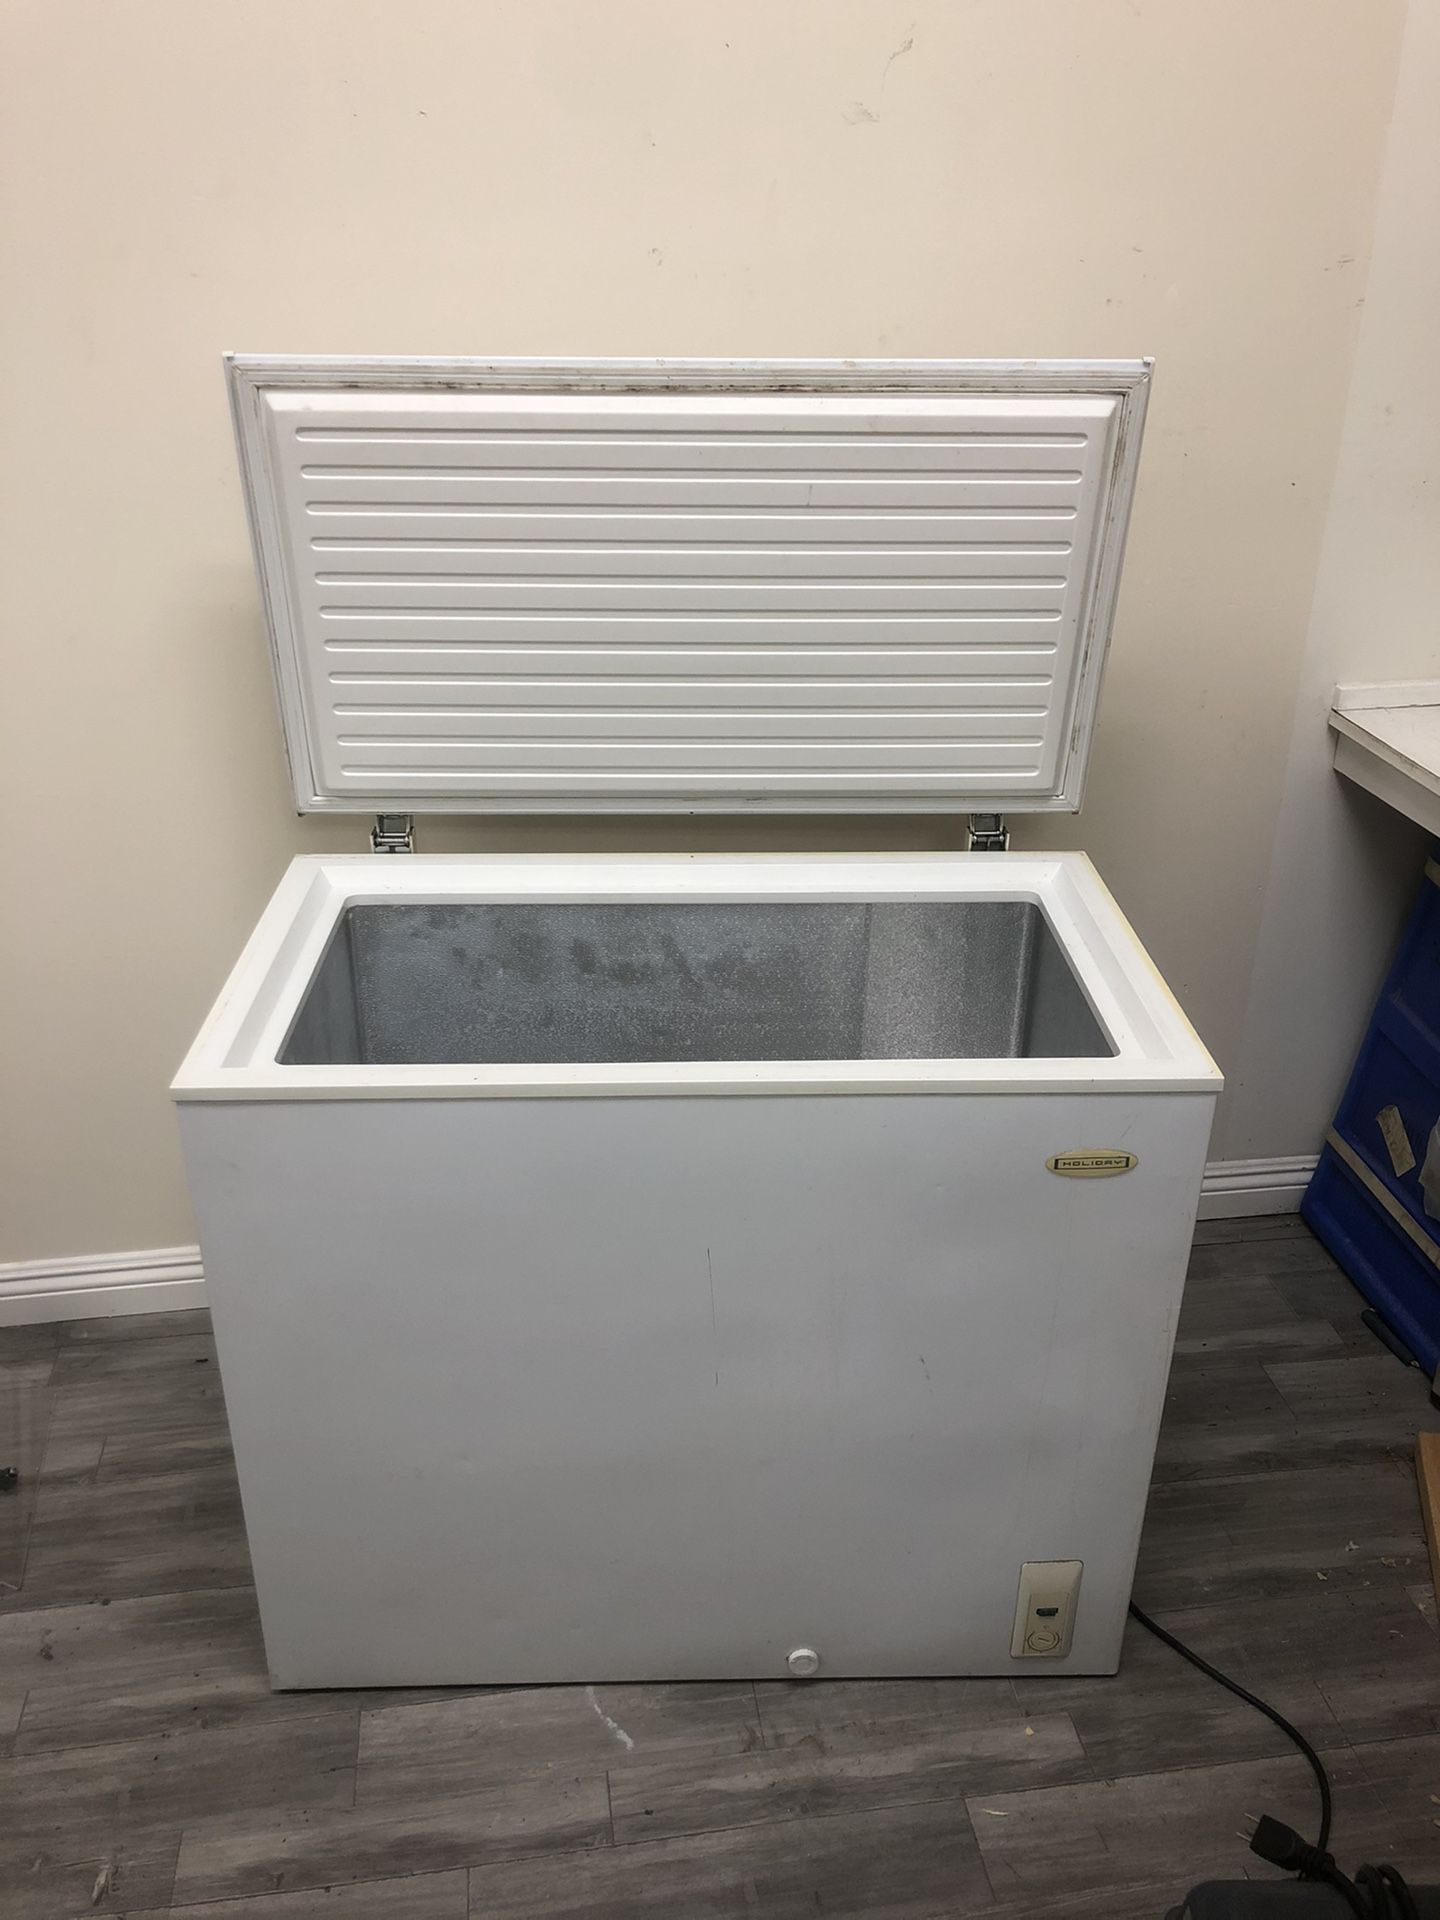 Holiday 7 Cu. Ft. Chest deep freezer - White